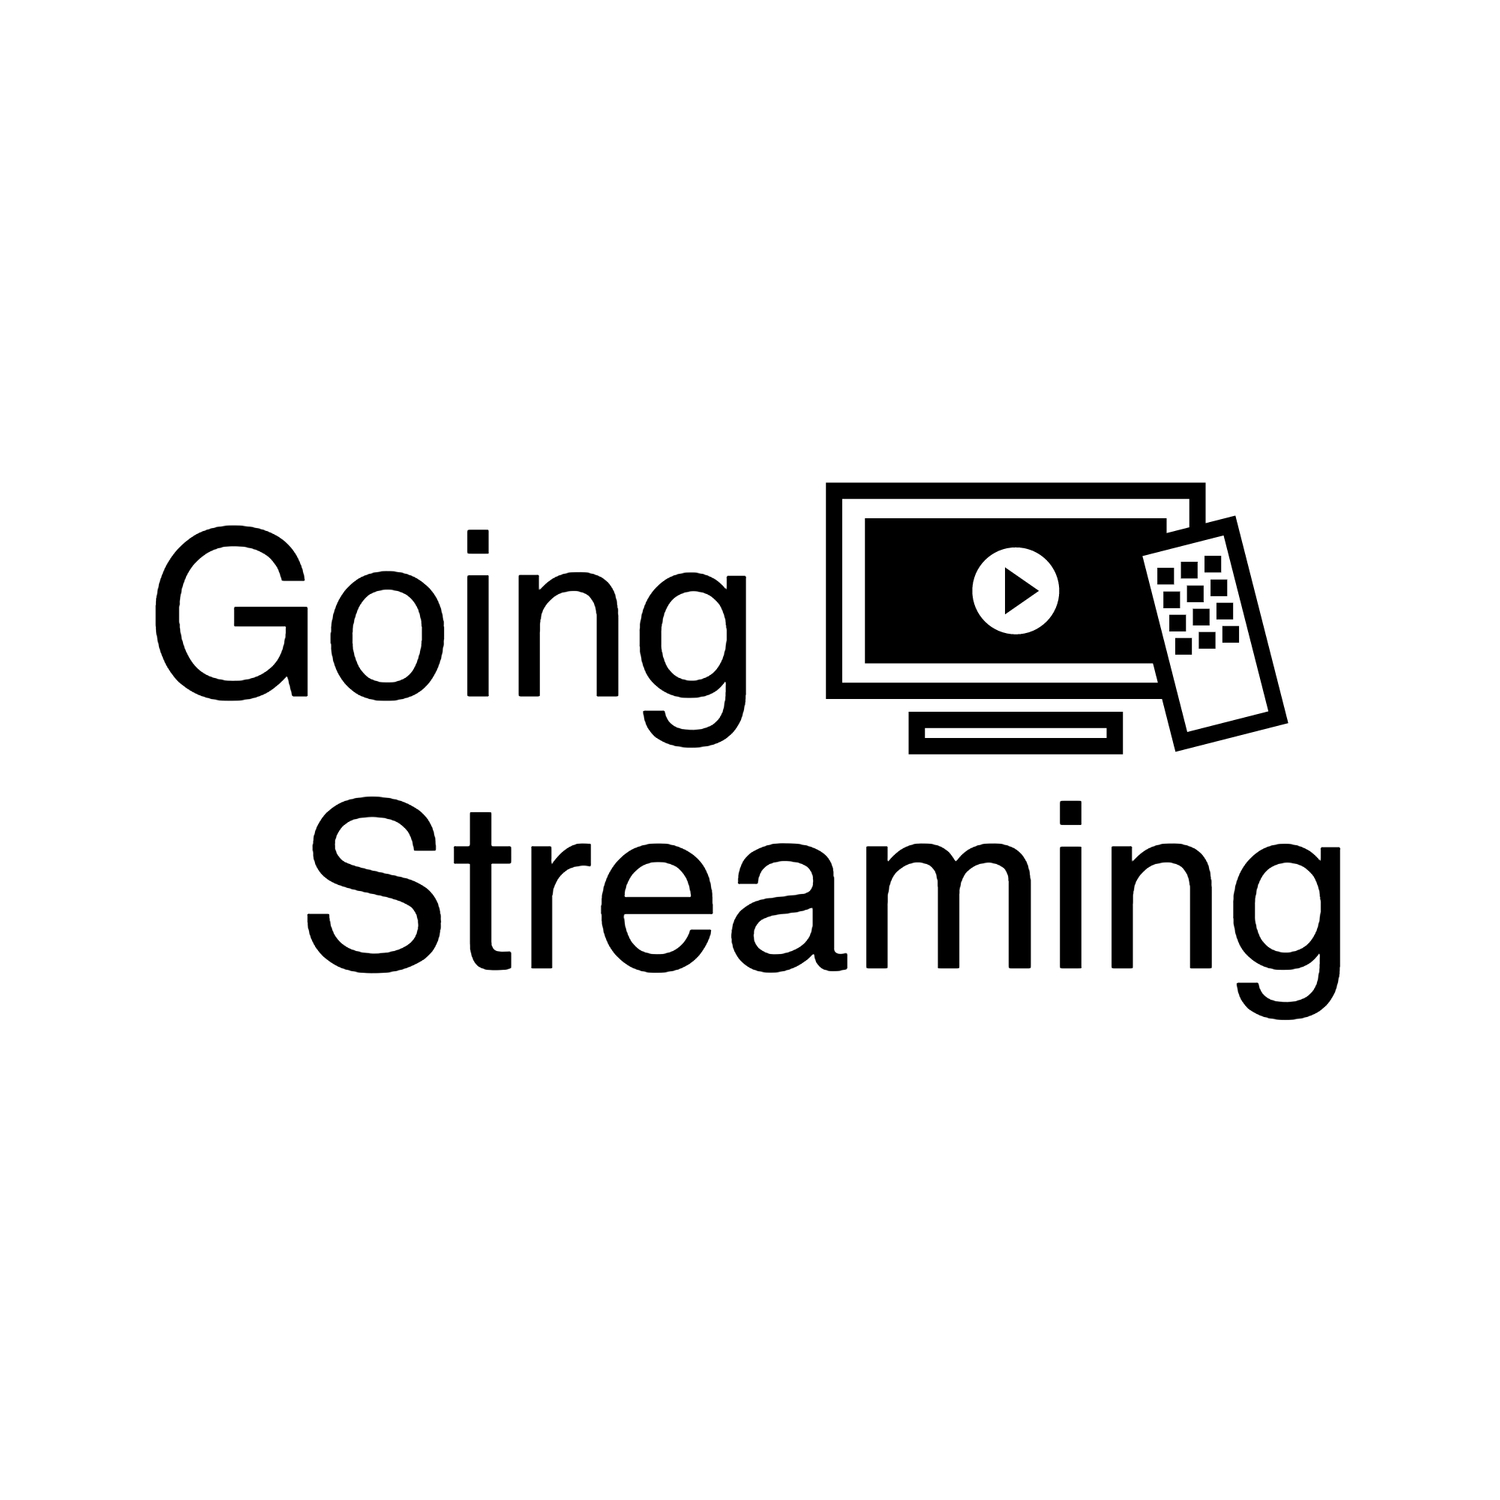 Going Streaming